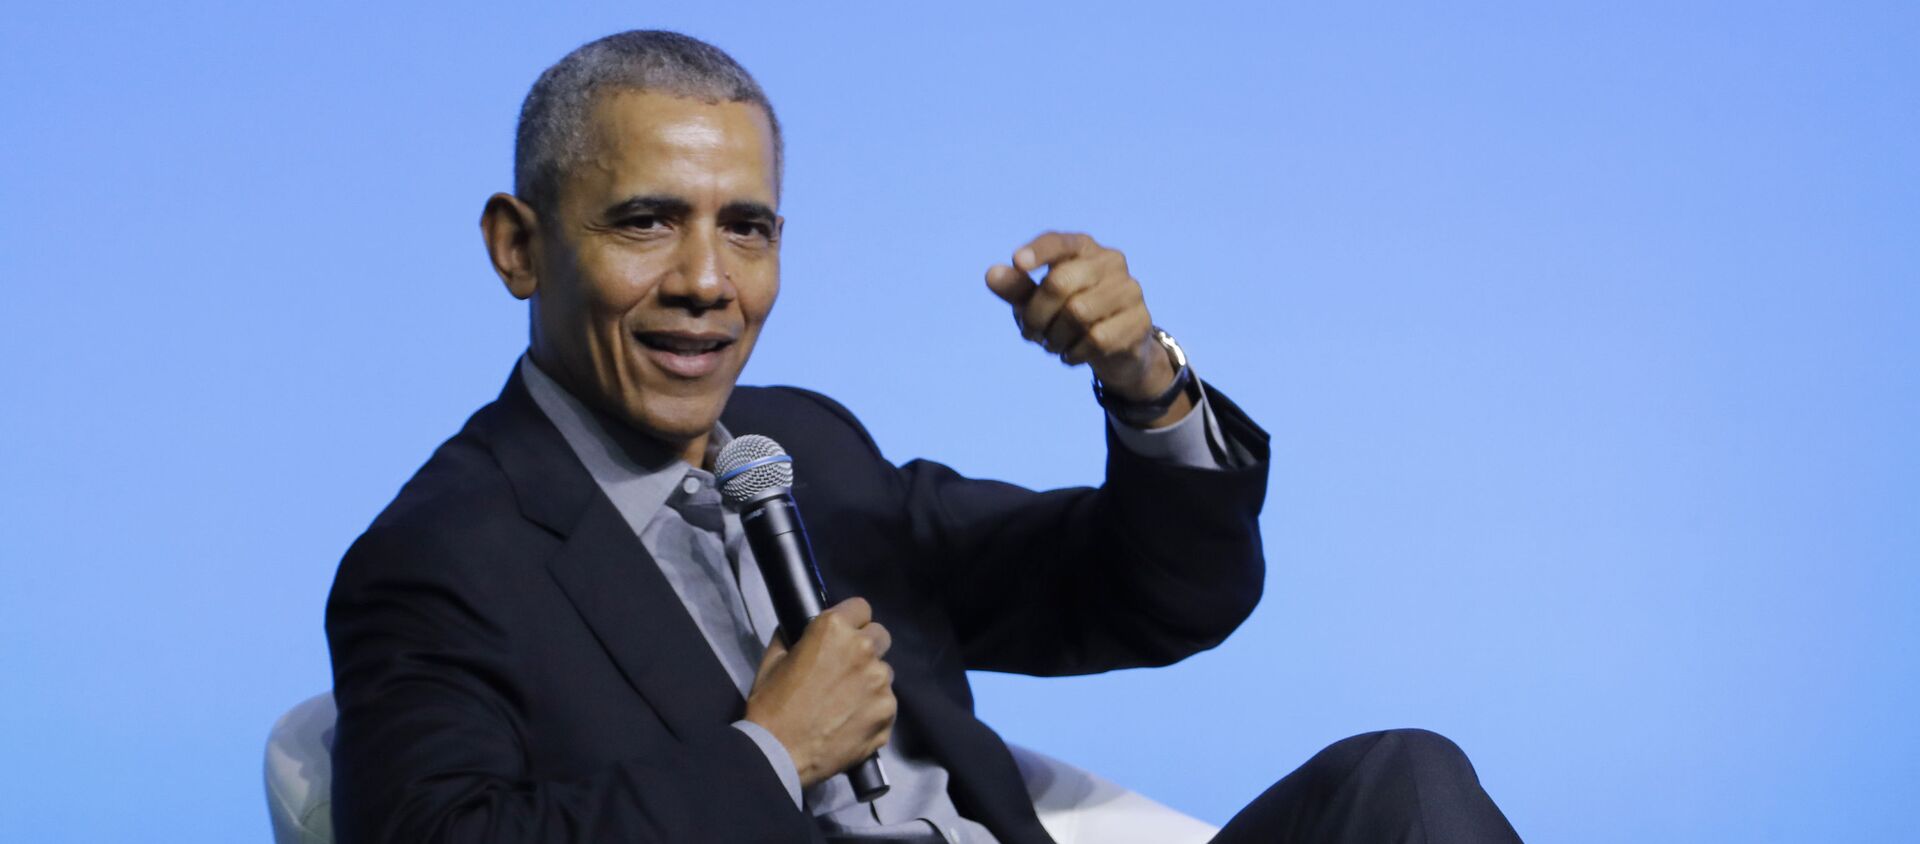 Former US President Barack Obama gesture as he attends the values-based leadership during a plenary session of the Gathering of Rising Leaders in the Asia Pacific, organized by the Obama Foundation in Kuala Lumpur, Malaysia, Friday, Dec. 13, 2019. - Sputnik International, 1920, 02.08.2021